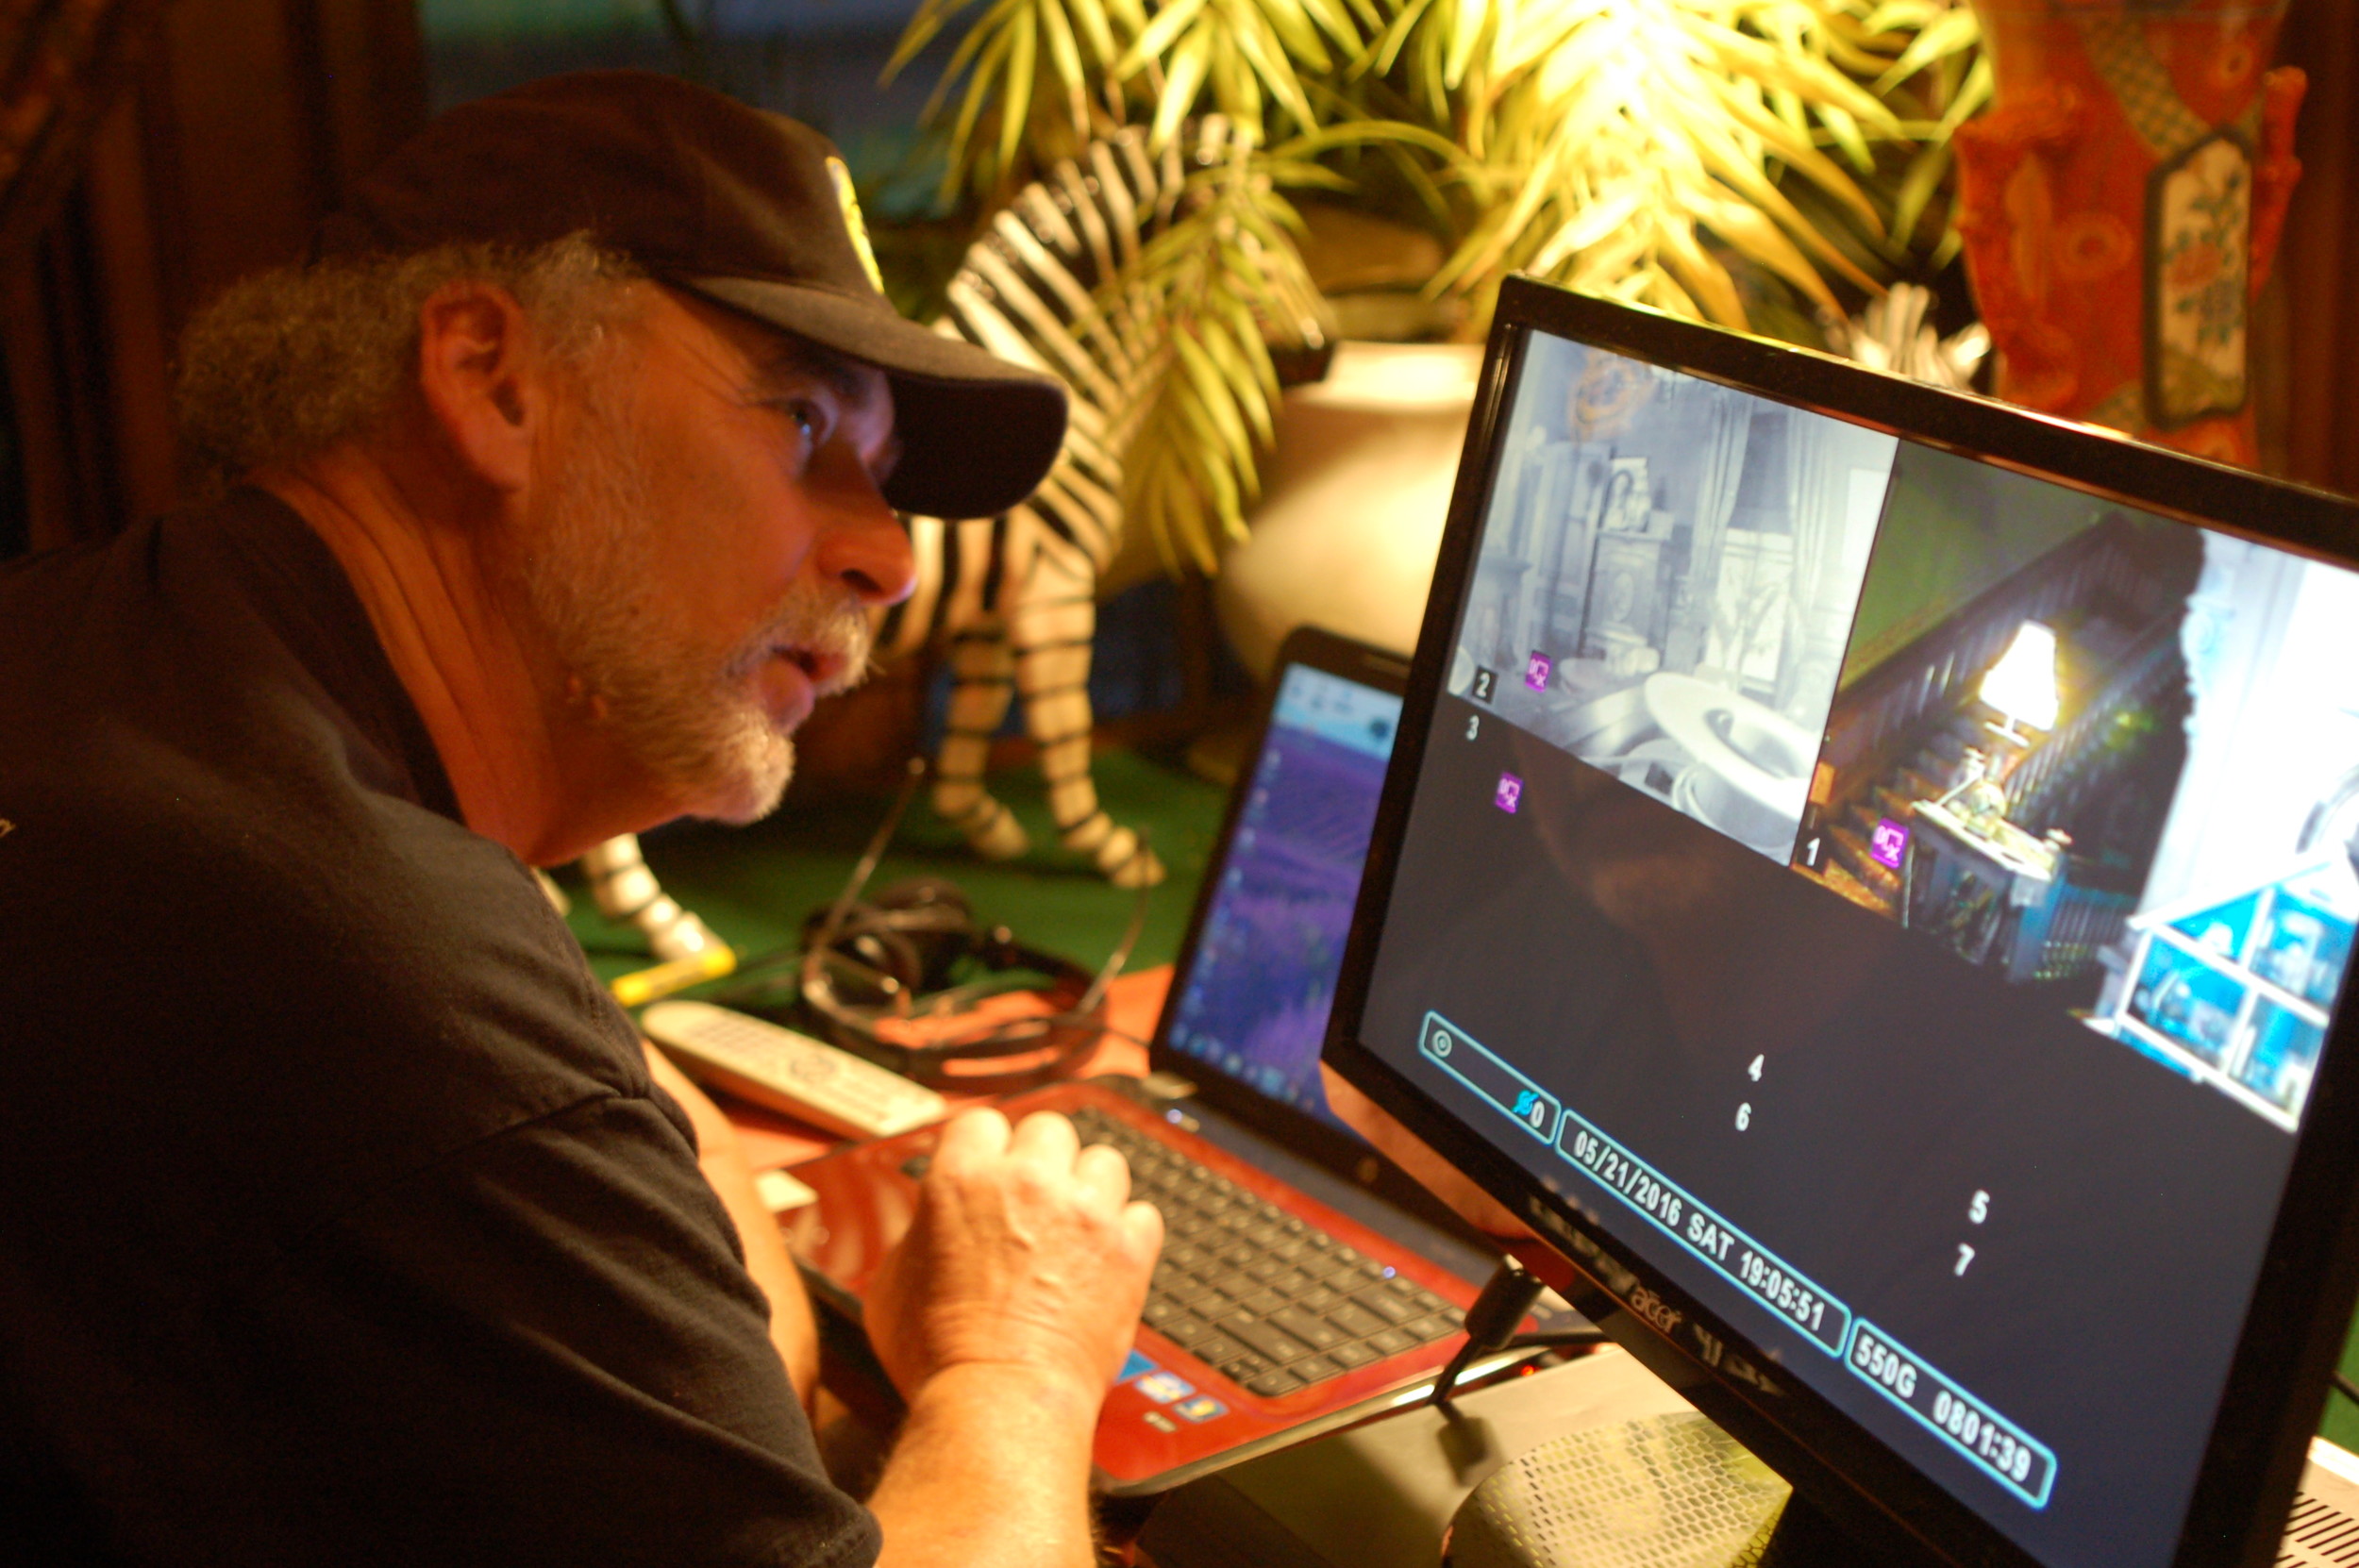 Ken DeCosta checks the monitor to confirm the cameras are set for maximum visibility.